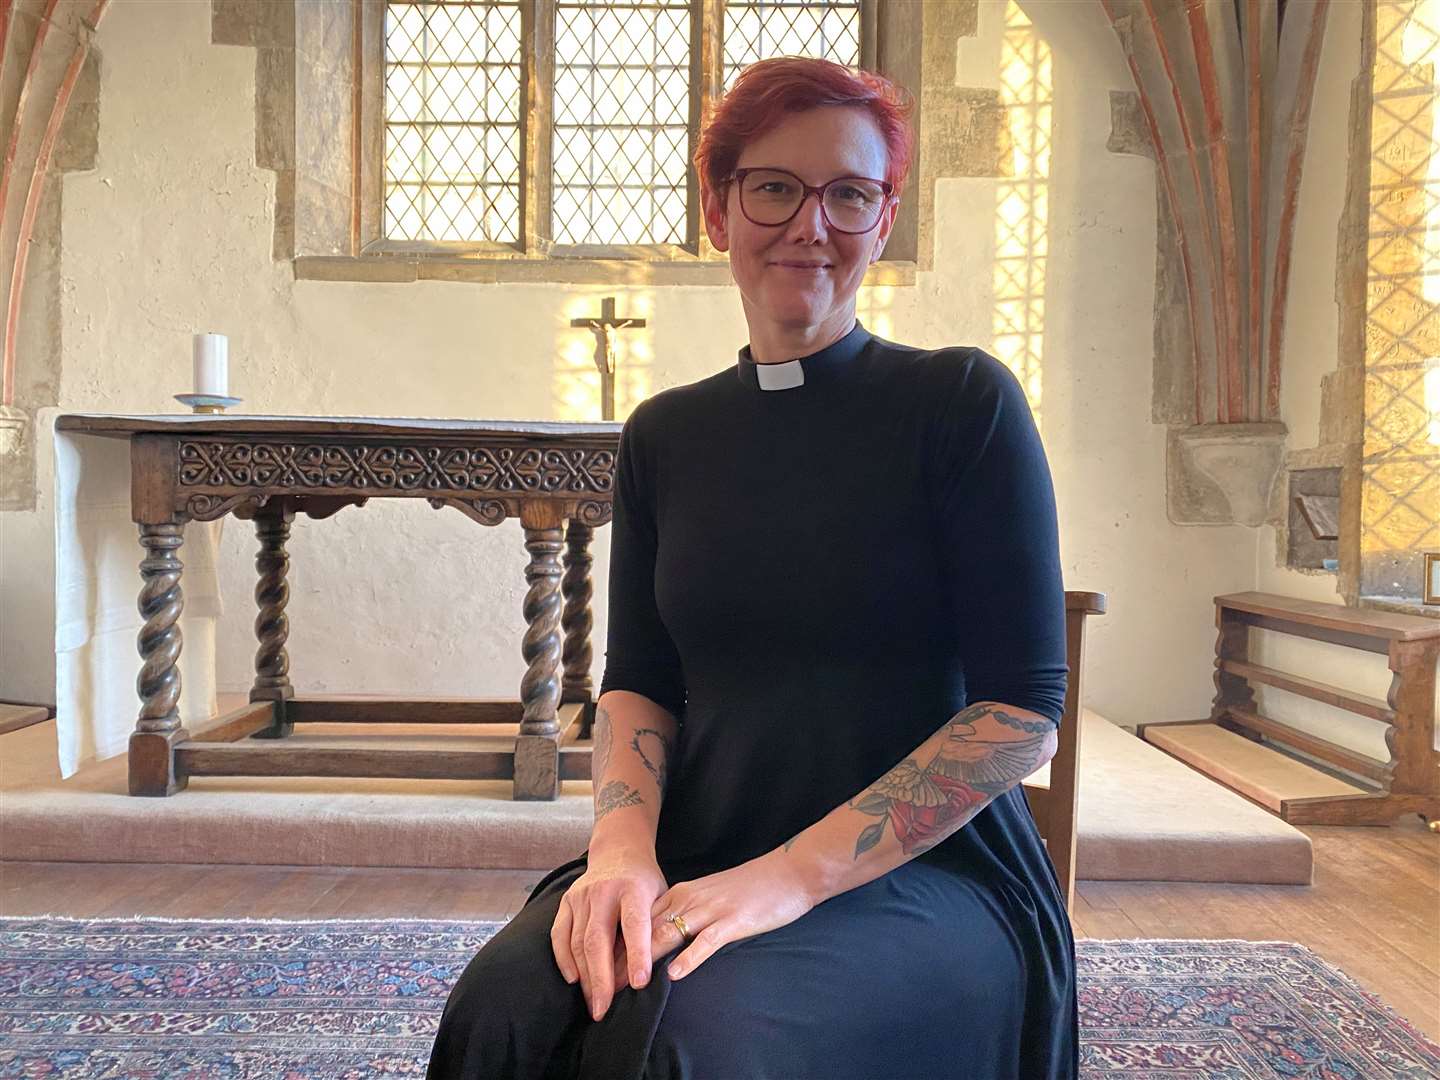 Revd Dalrymple, Head of Worship at Canterbury Cathedral, says her tattoos of flowers, animals, women’s sexual organs and religious symbolism “speaks of the Christian story”